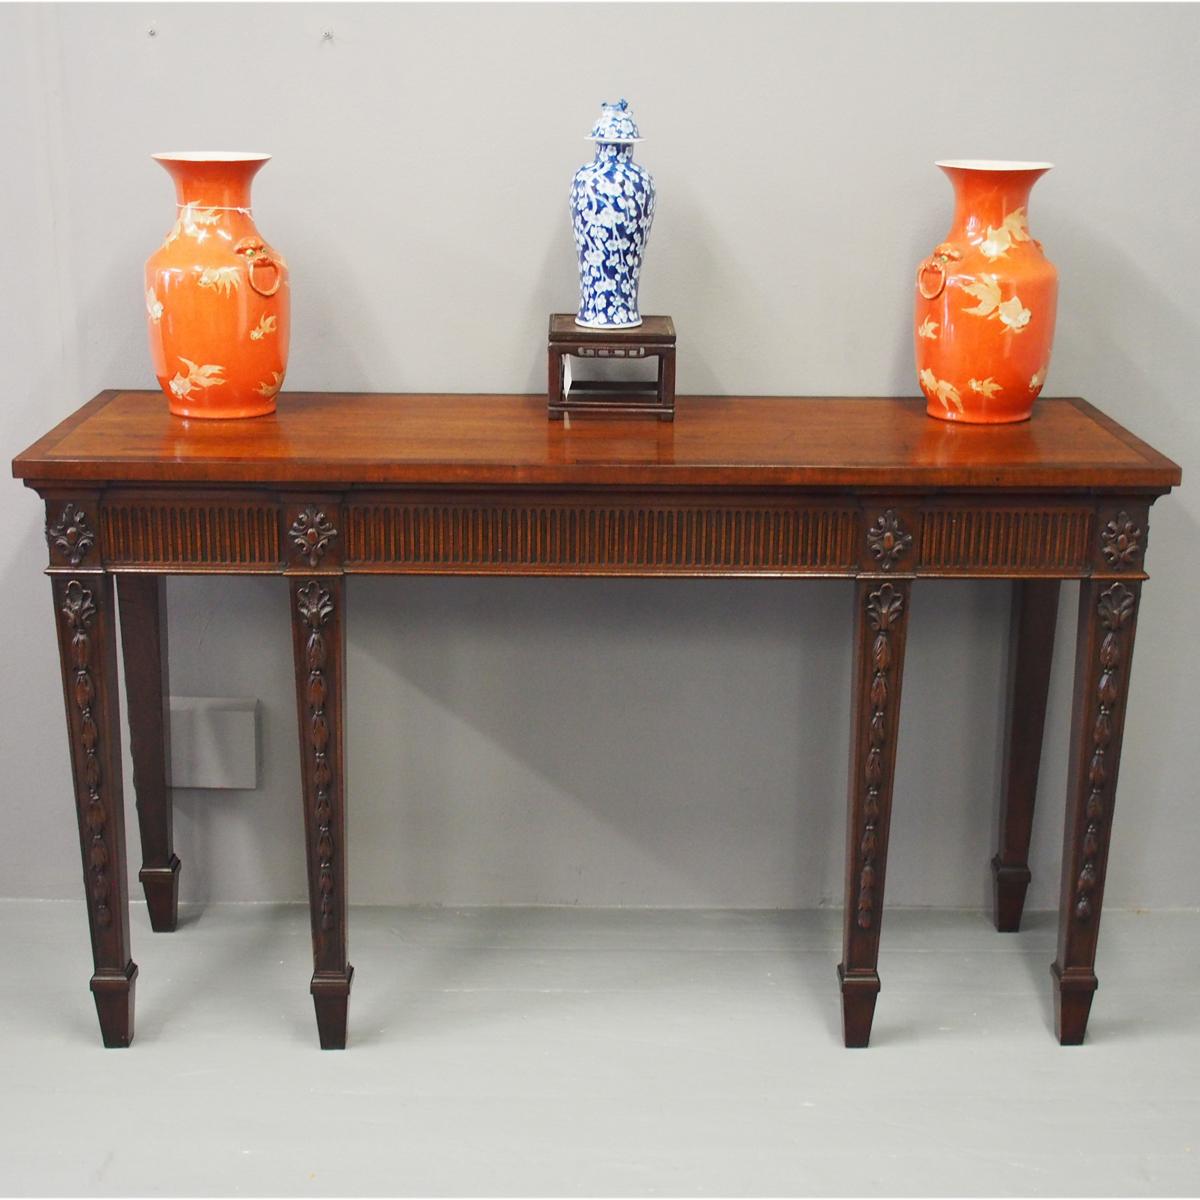 George III style mahogany serving table, circa 1880. With a later crossbanded top above a fluted frieze which is accented by foliate carved blocks above the legs. There are carved shells and husk trails to the front legs, and all legs are square and